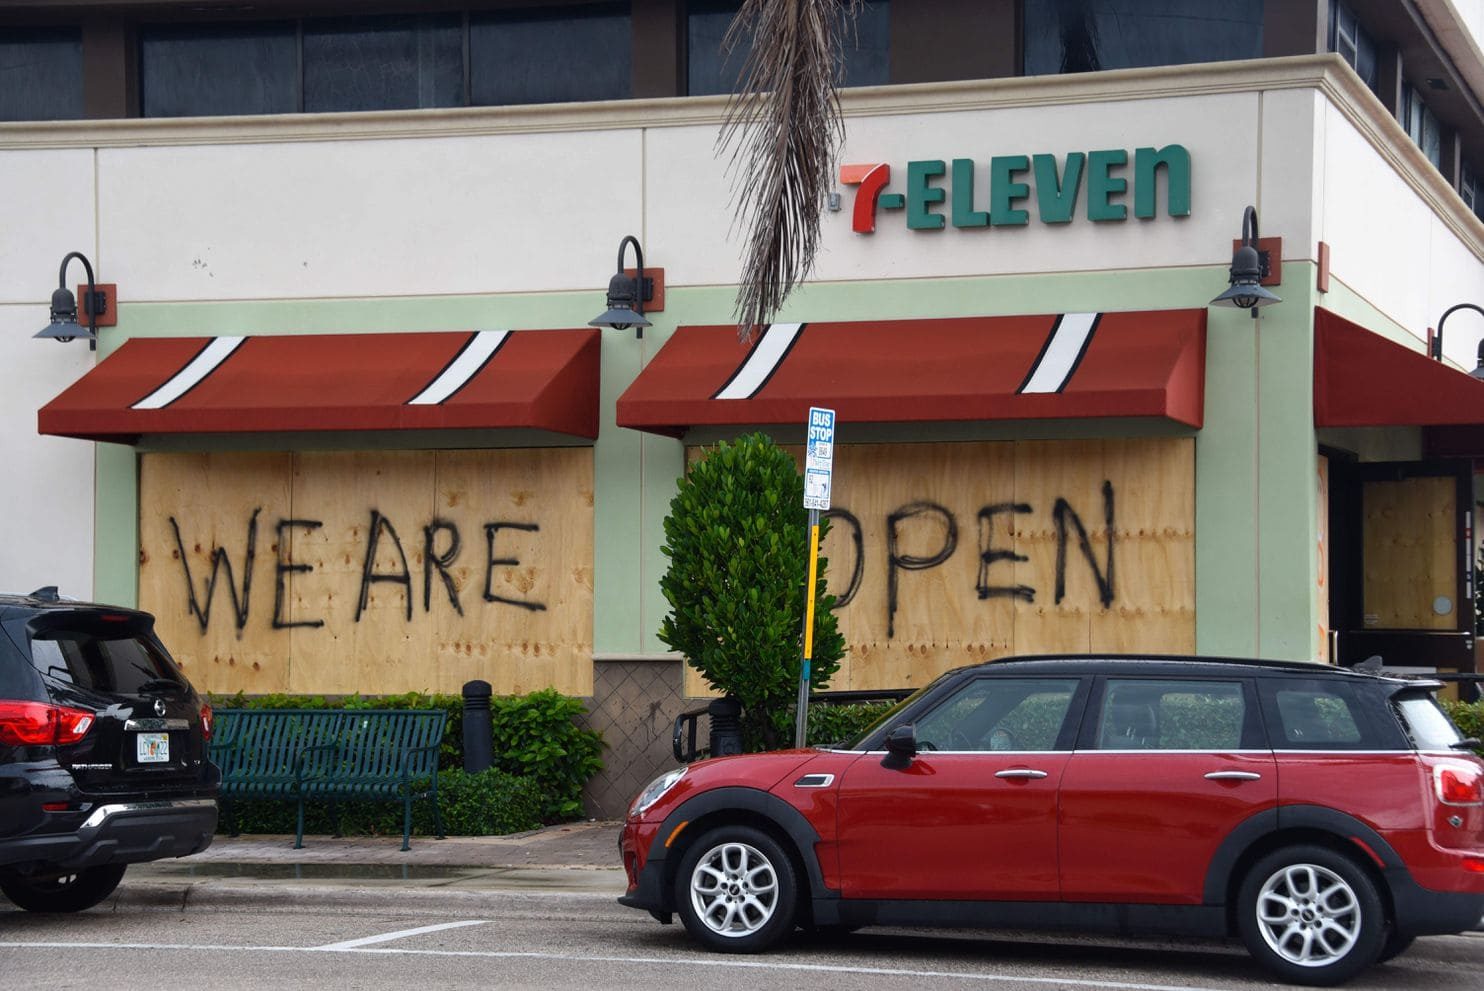 Shops windows are seen boarded up as Hurricane Dorian approaches in Deerfield Beach, Florida on September 2, 2019